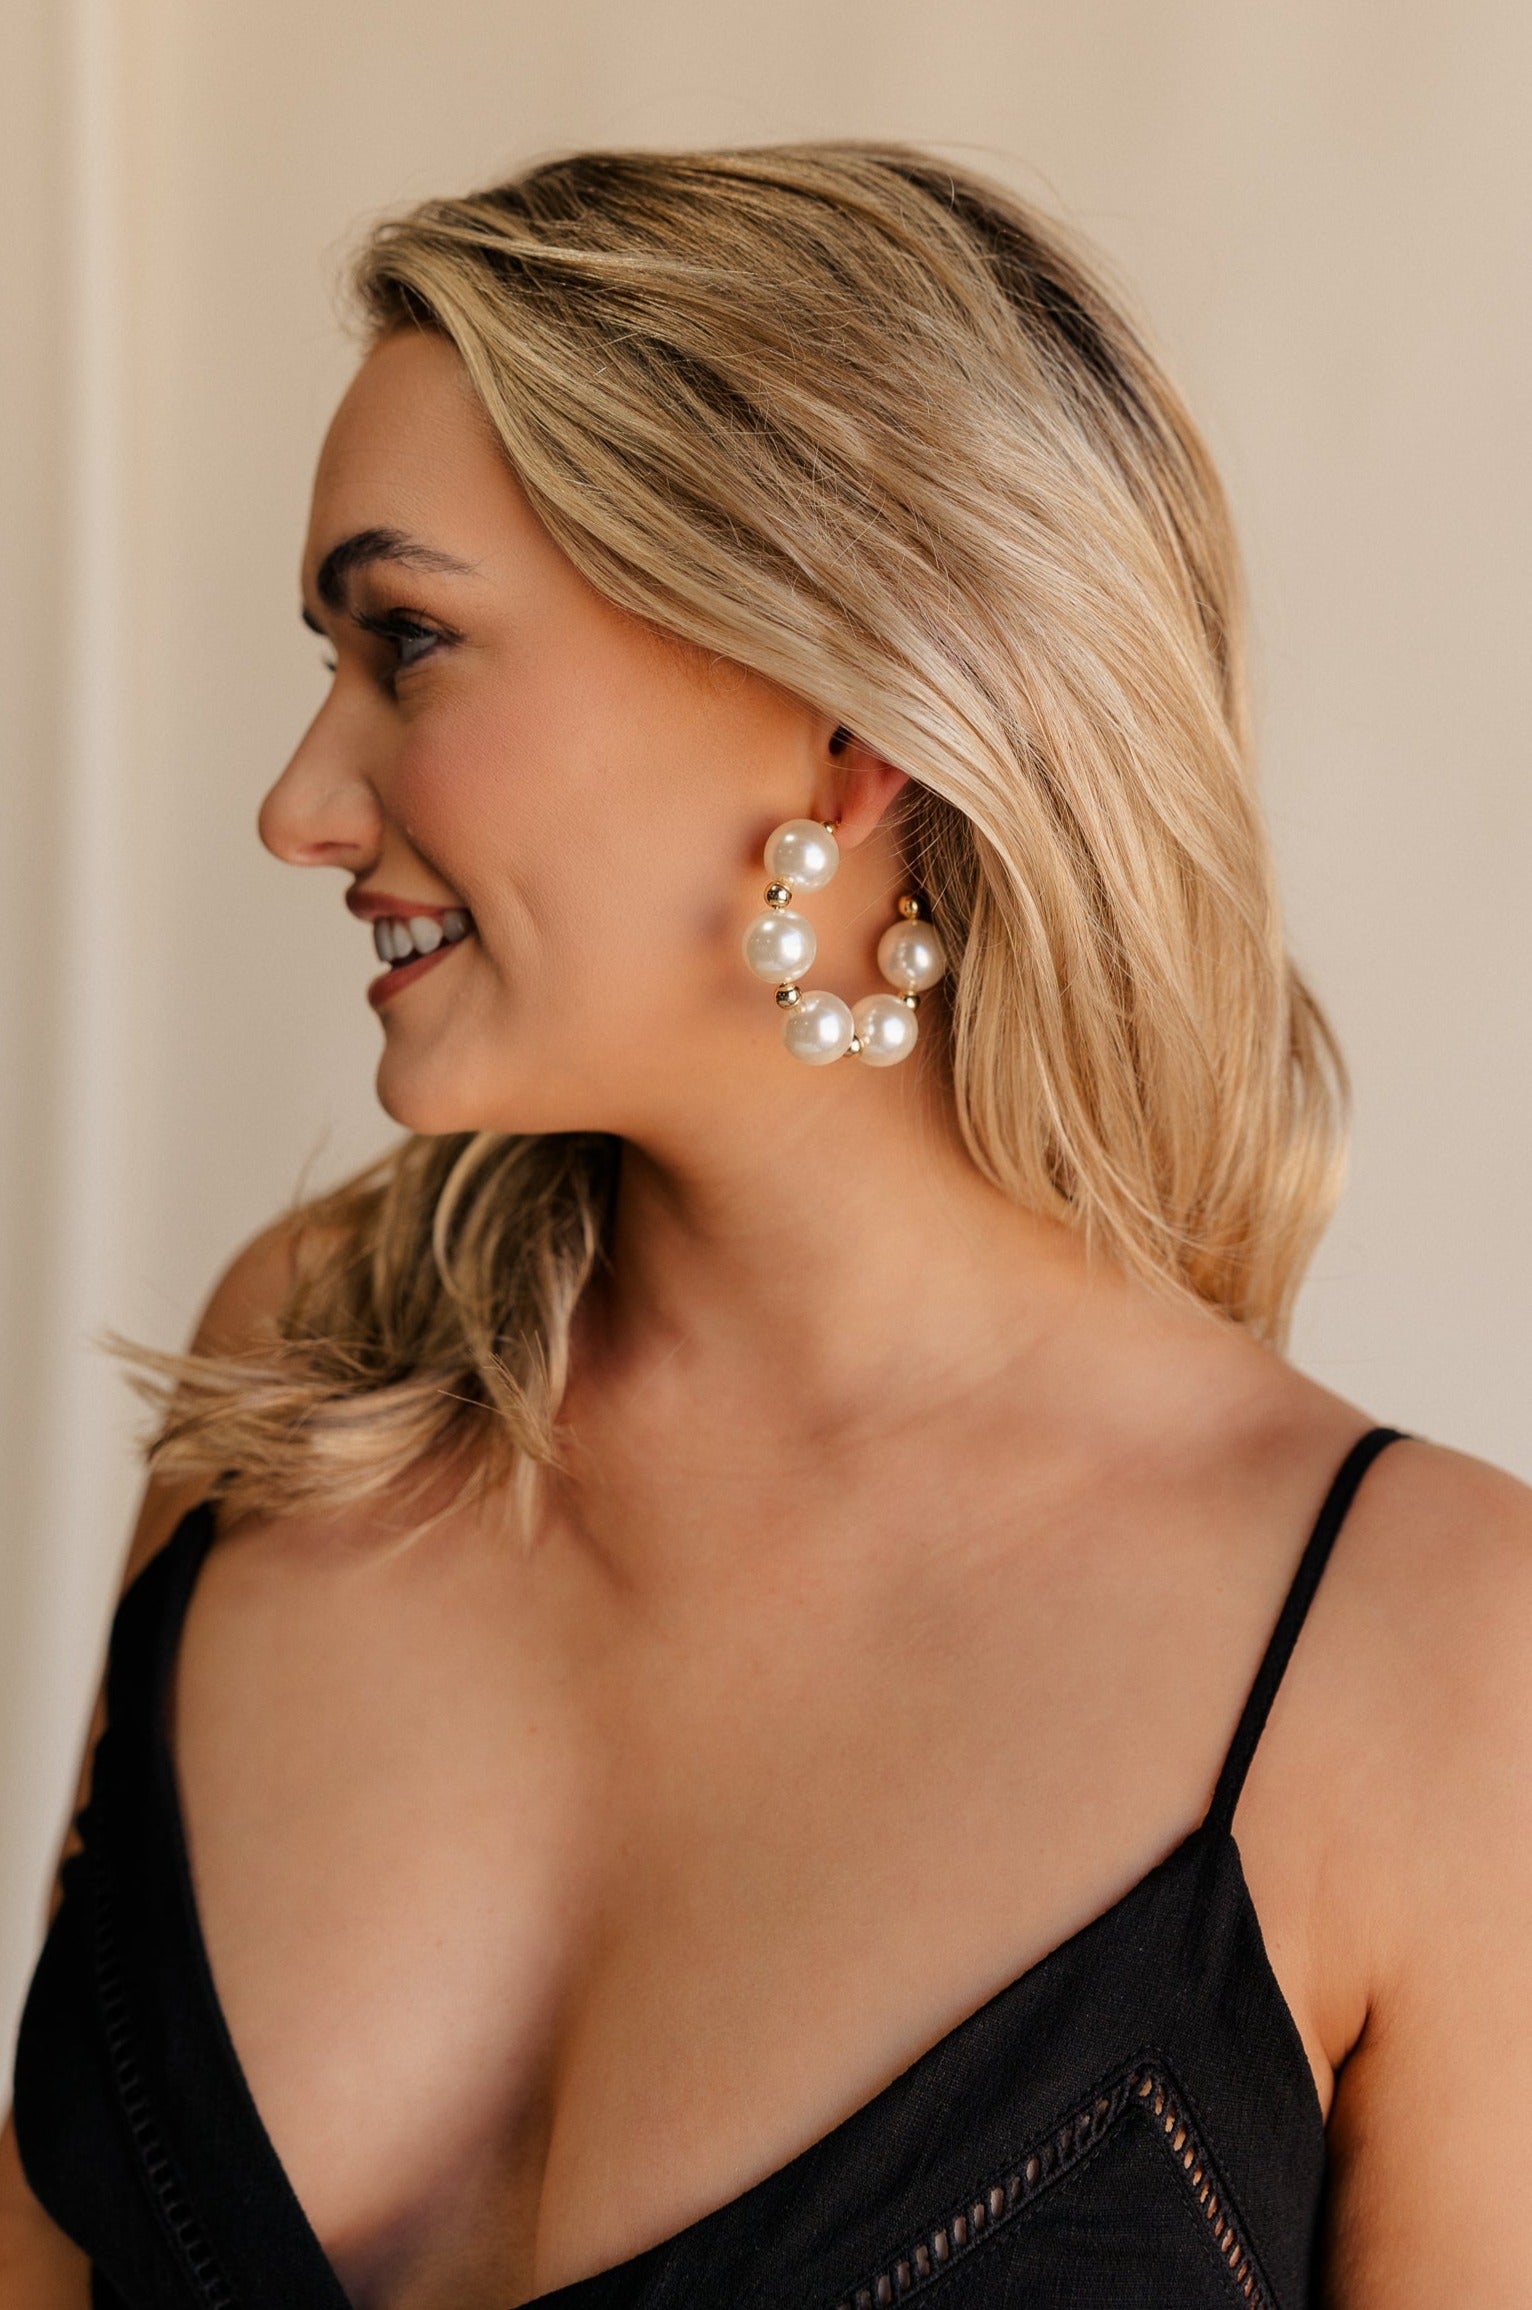 Side view of female model wearing the Delilah Pearl Hoop Earring which features oversized pearl beads with gold details and large open hoops with back closure